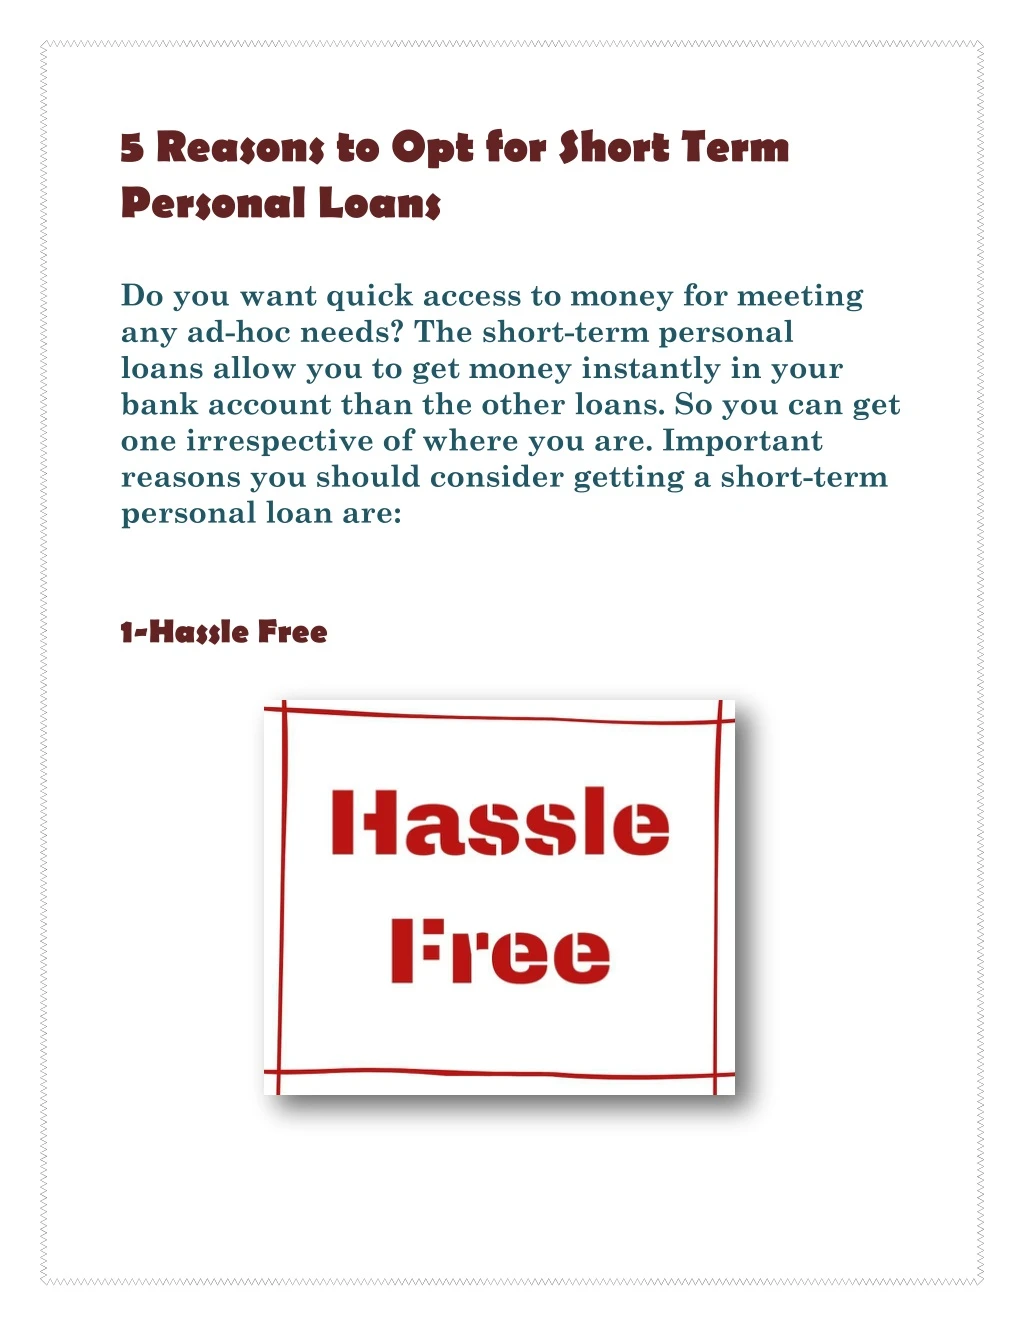 5 reasons to opt for short term personal loans